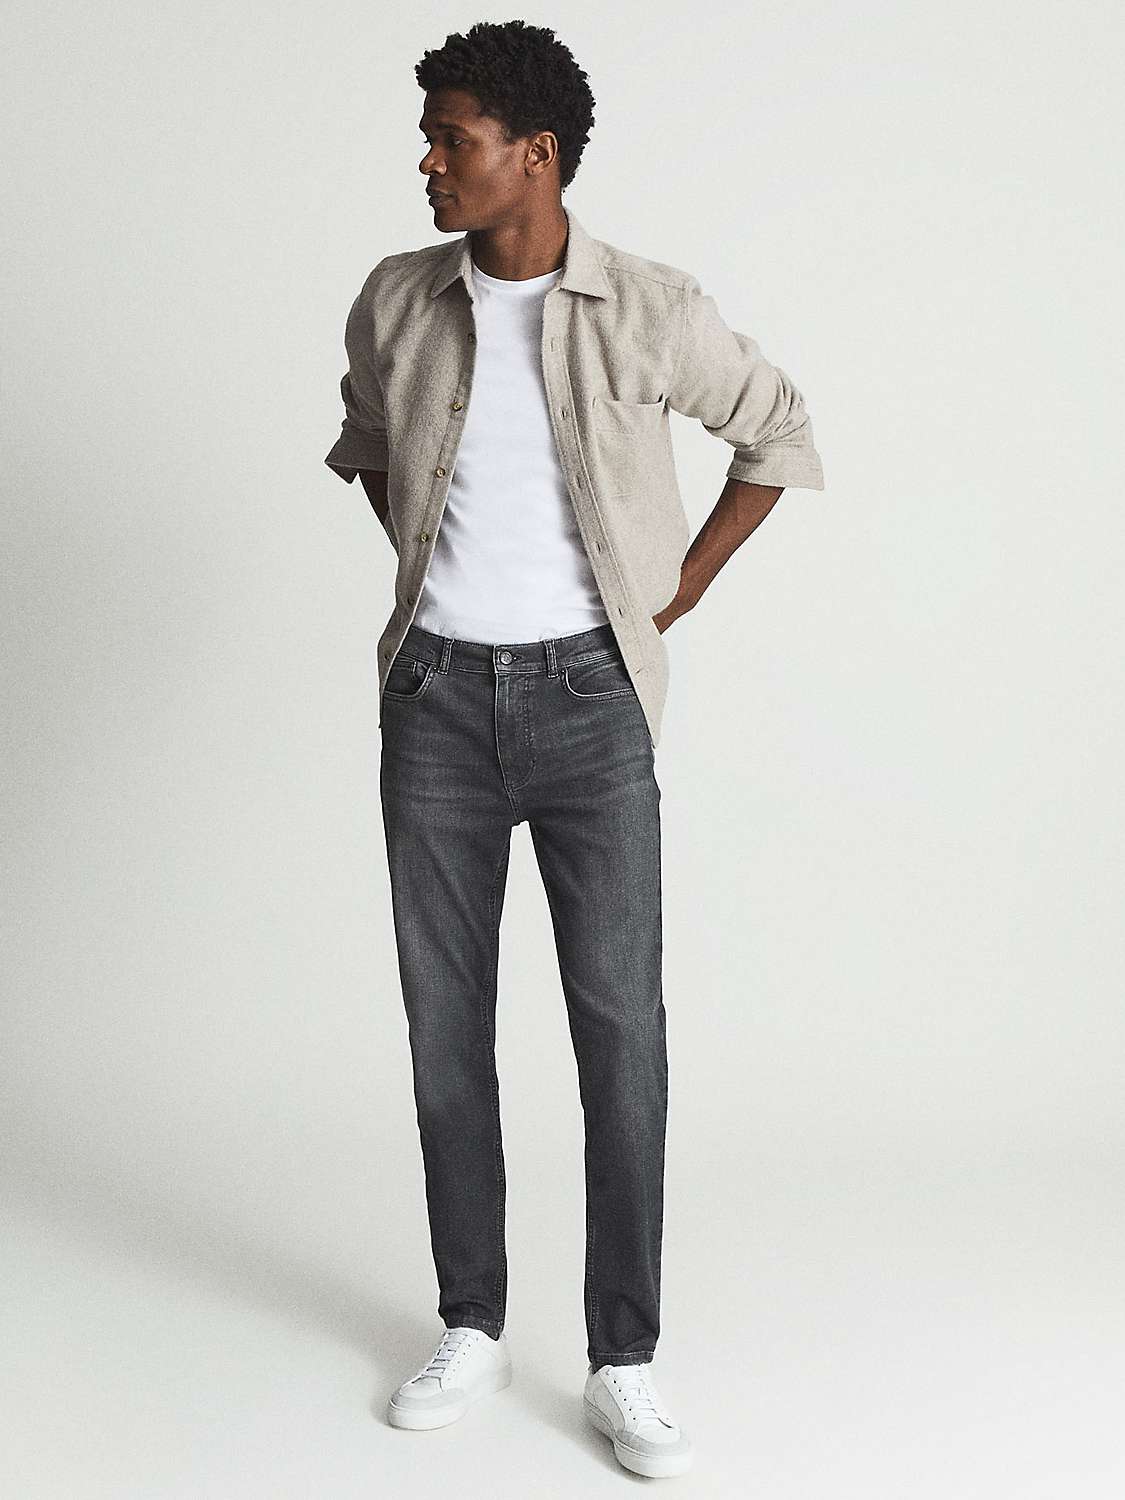 Buy Reiss Harry Slim Jeans, Washed Grey Online at johnlewis.com